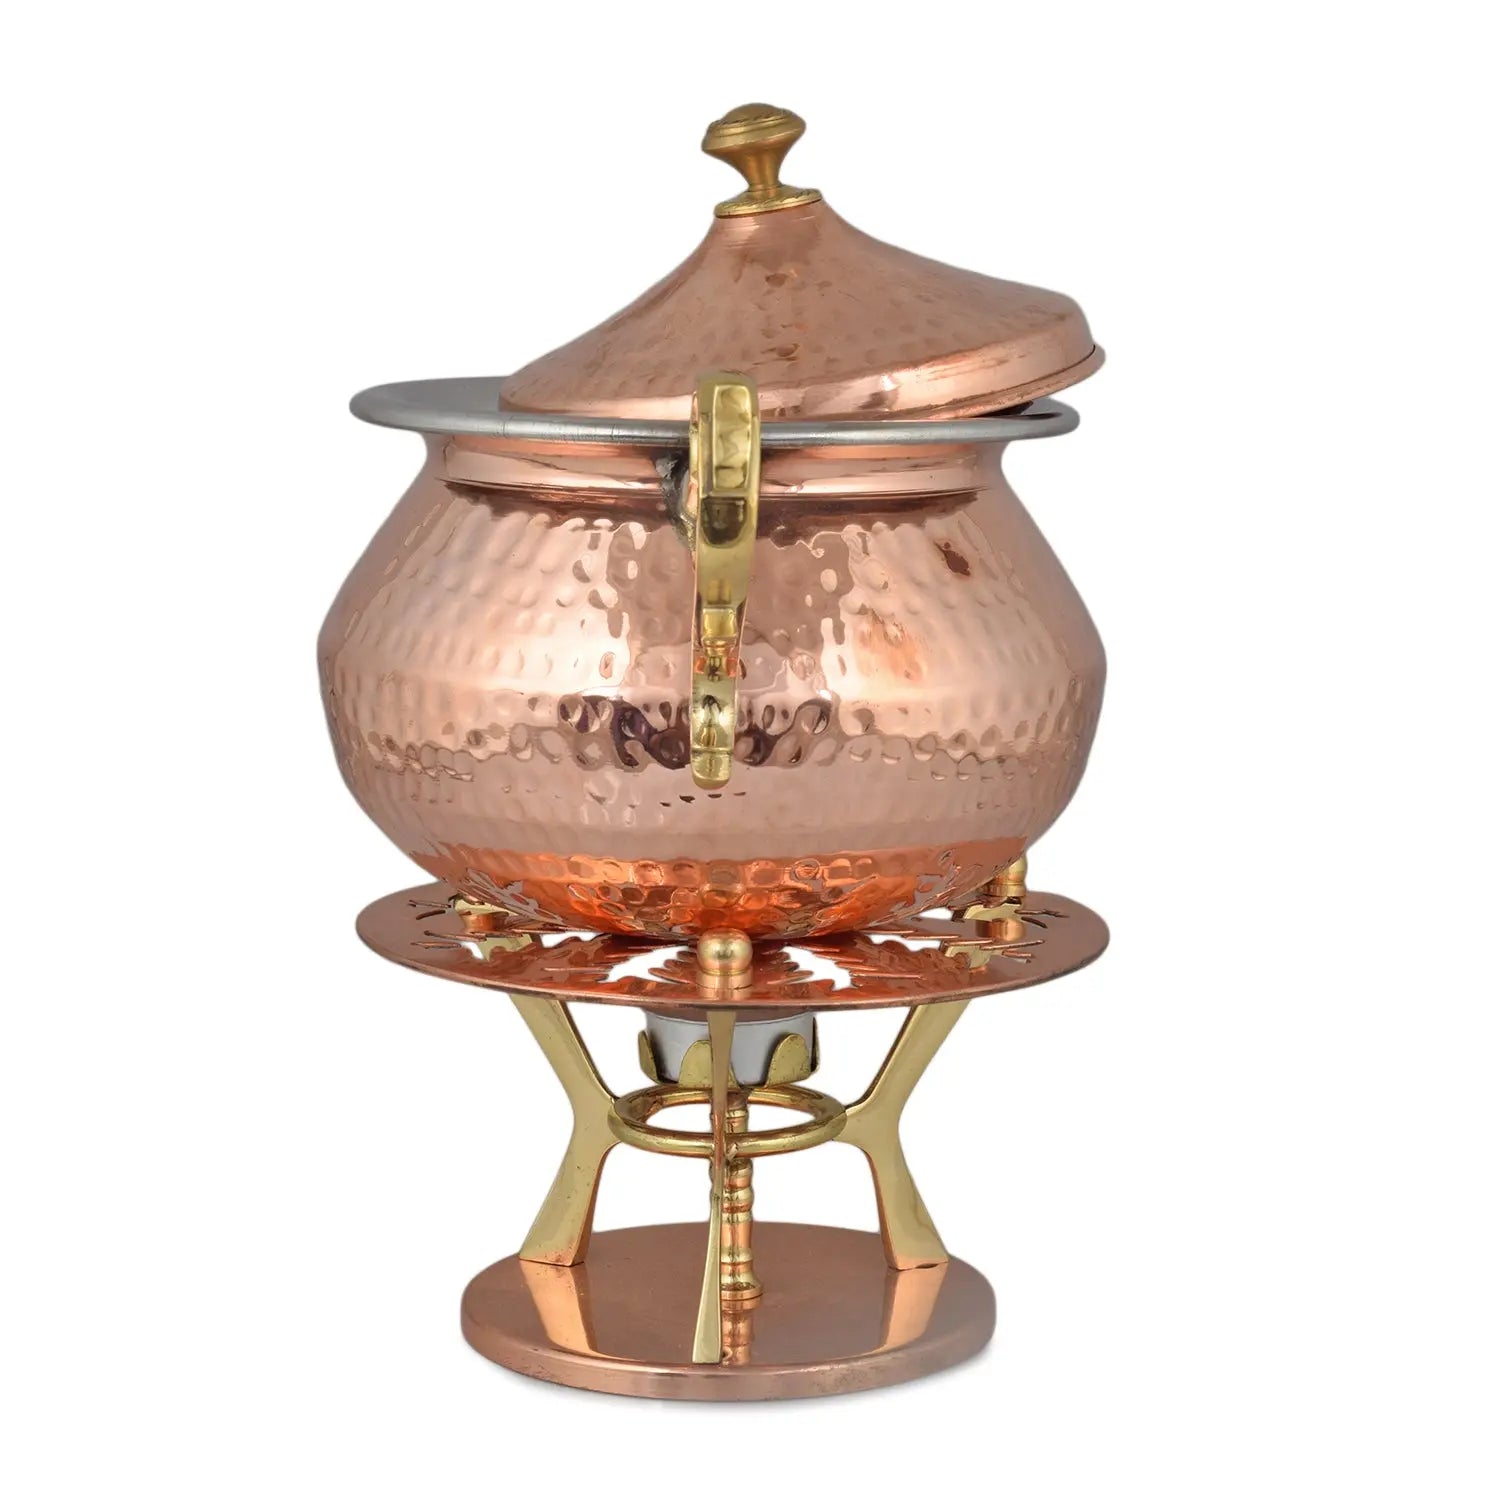 Crockery Wala And Company Copper Steel Hammered Punjabi Handi With Copper Warmer Stand & Copper Lid For Serving Serveware 1200 ML - CROCKERY WALA AND COMPANY 